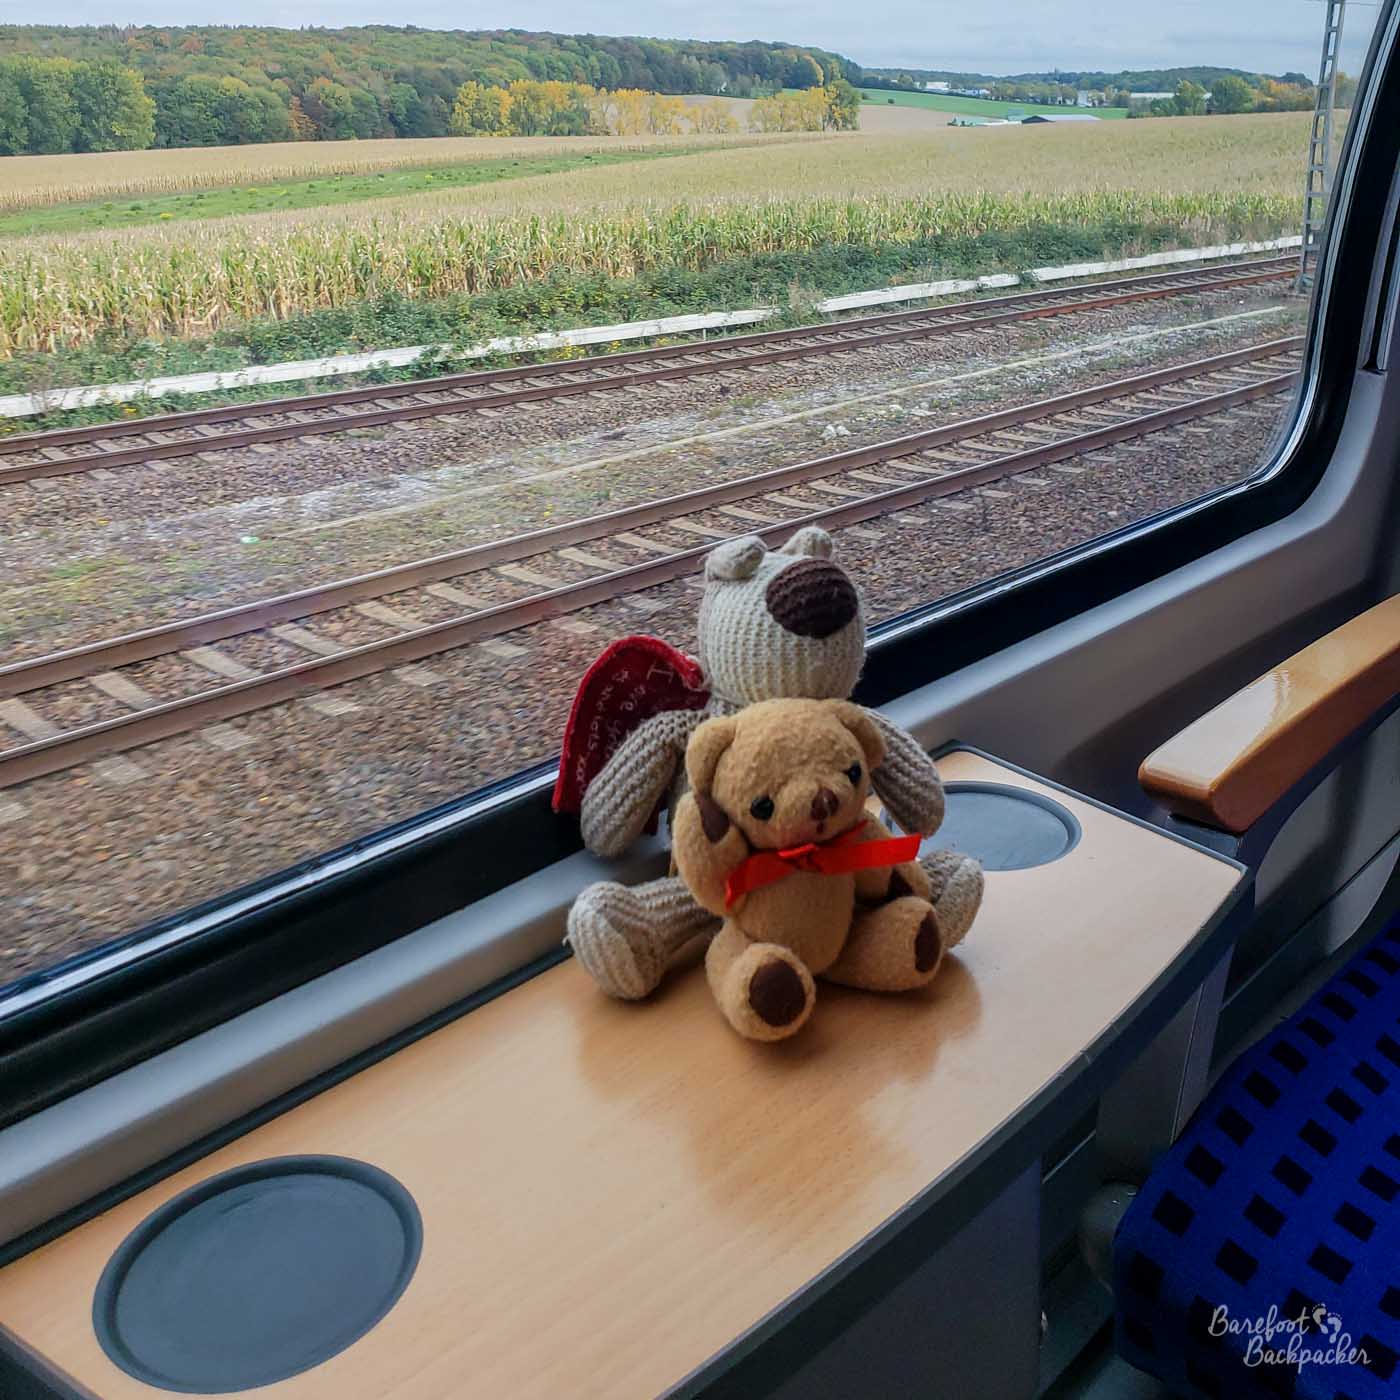 Two small soft toys - Baby Ian and Dave - are sat on the formica table in a train carriage. Behind them is a window showing other tracks and bushes in the beyond.